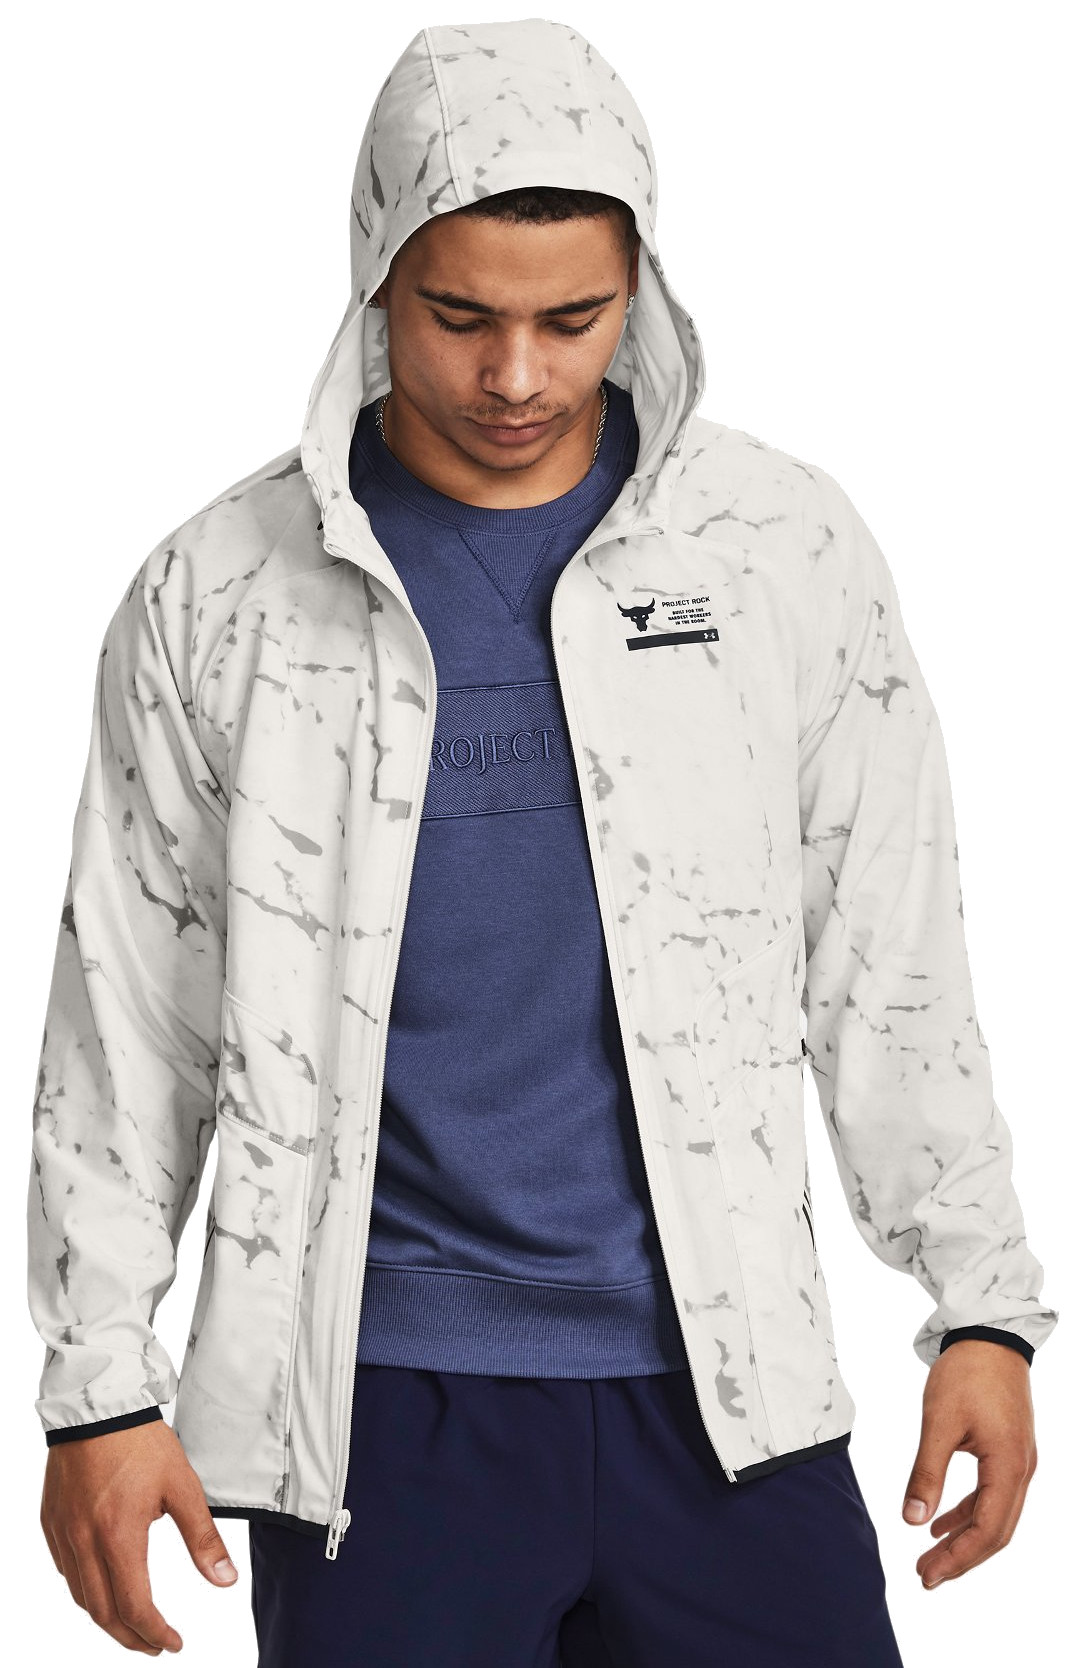 Hooded jacket Under Armour Project Rock Unstoppable Printed 